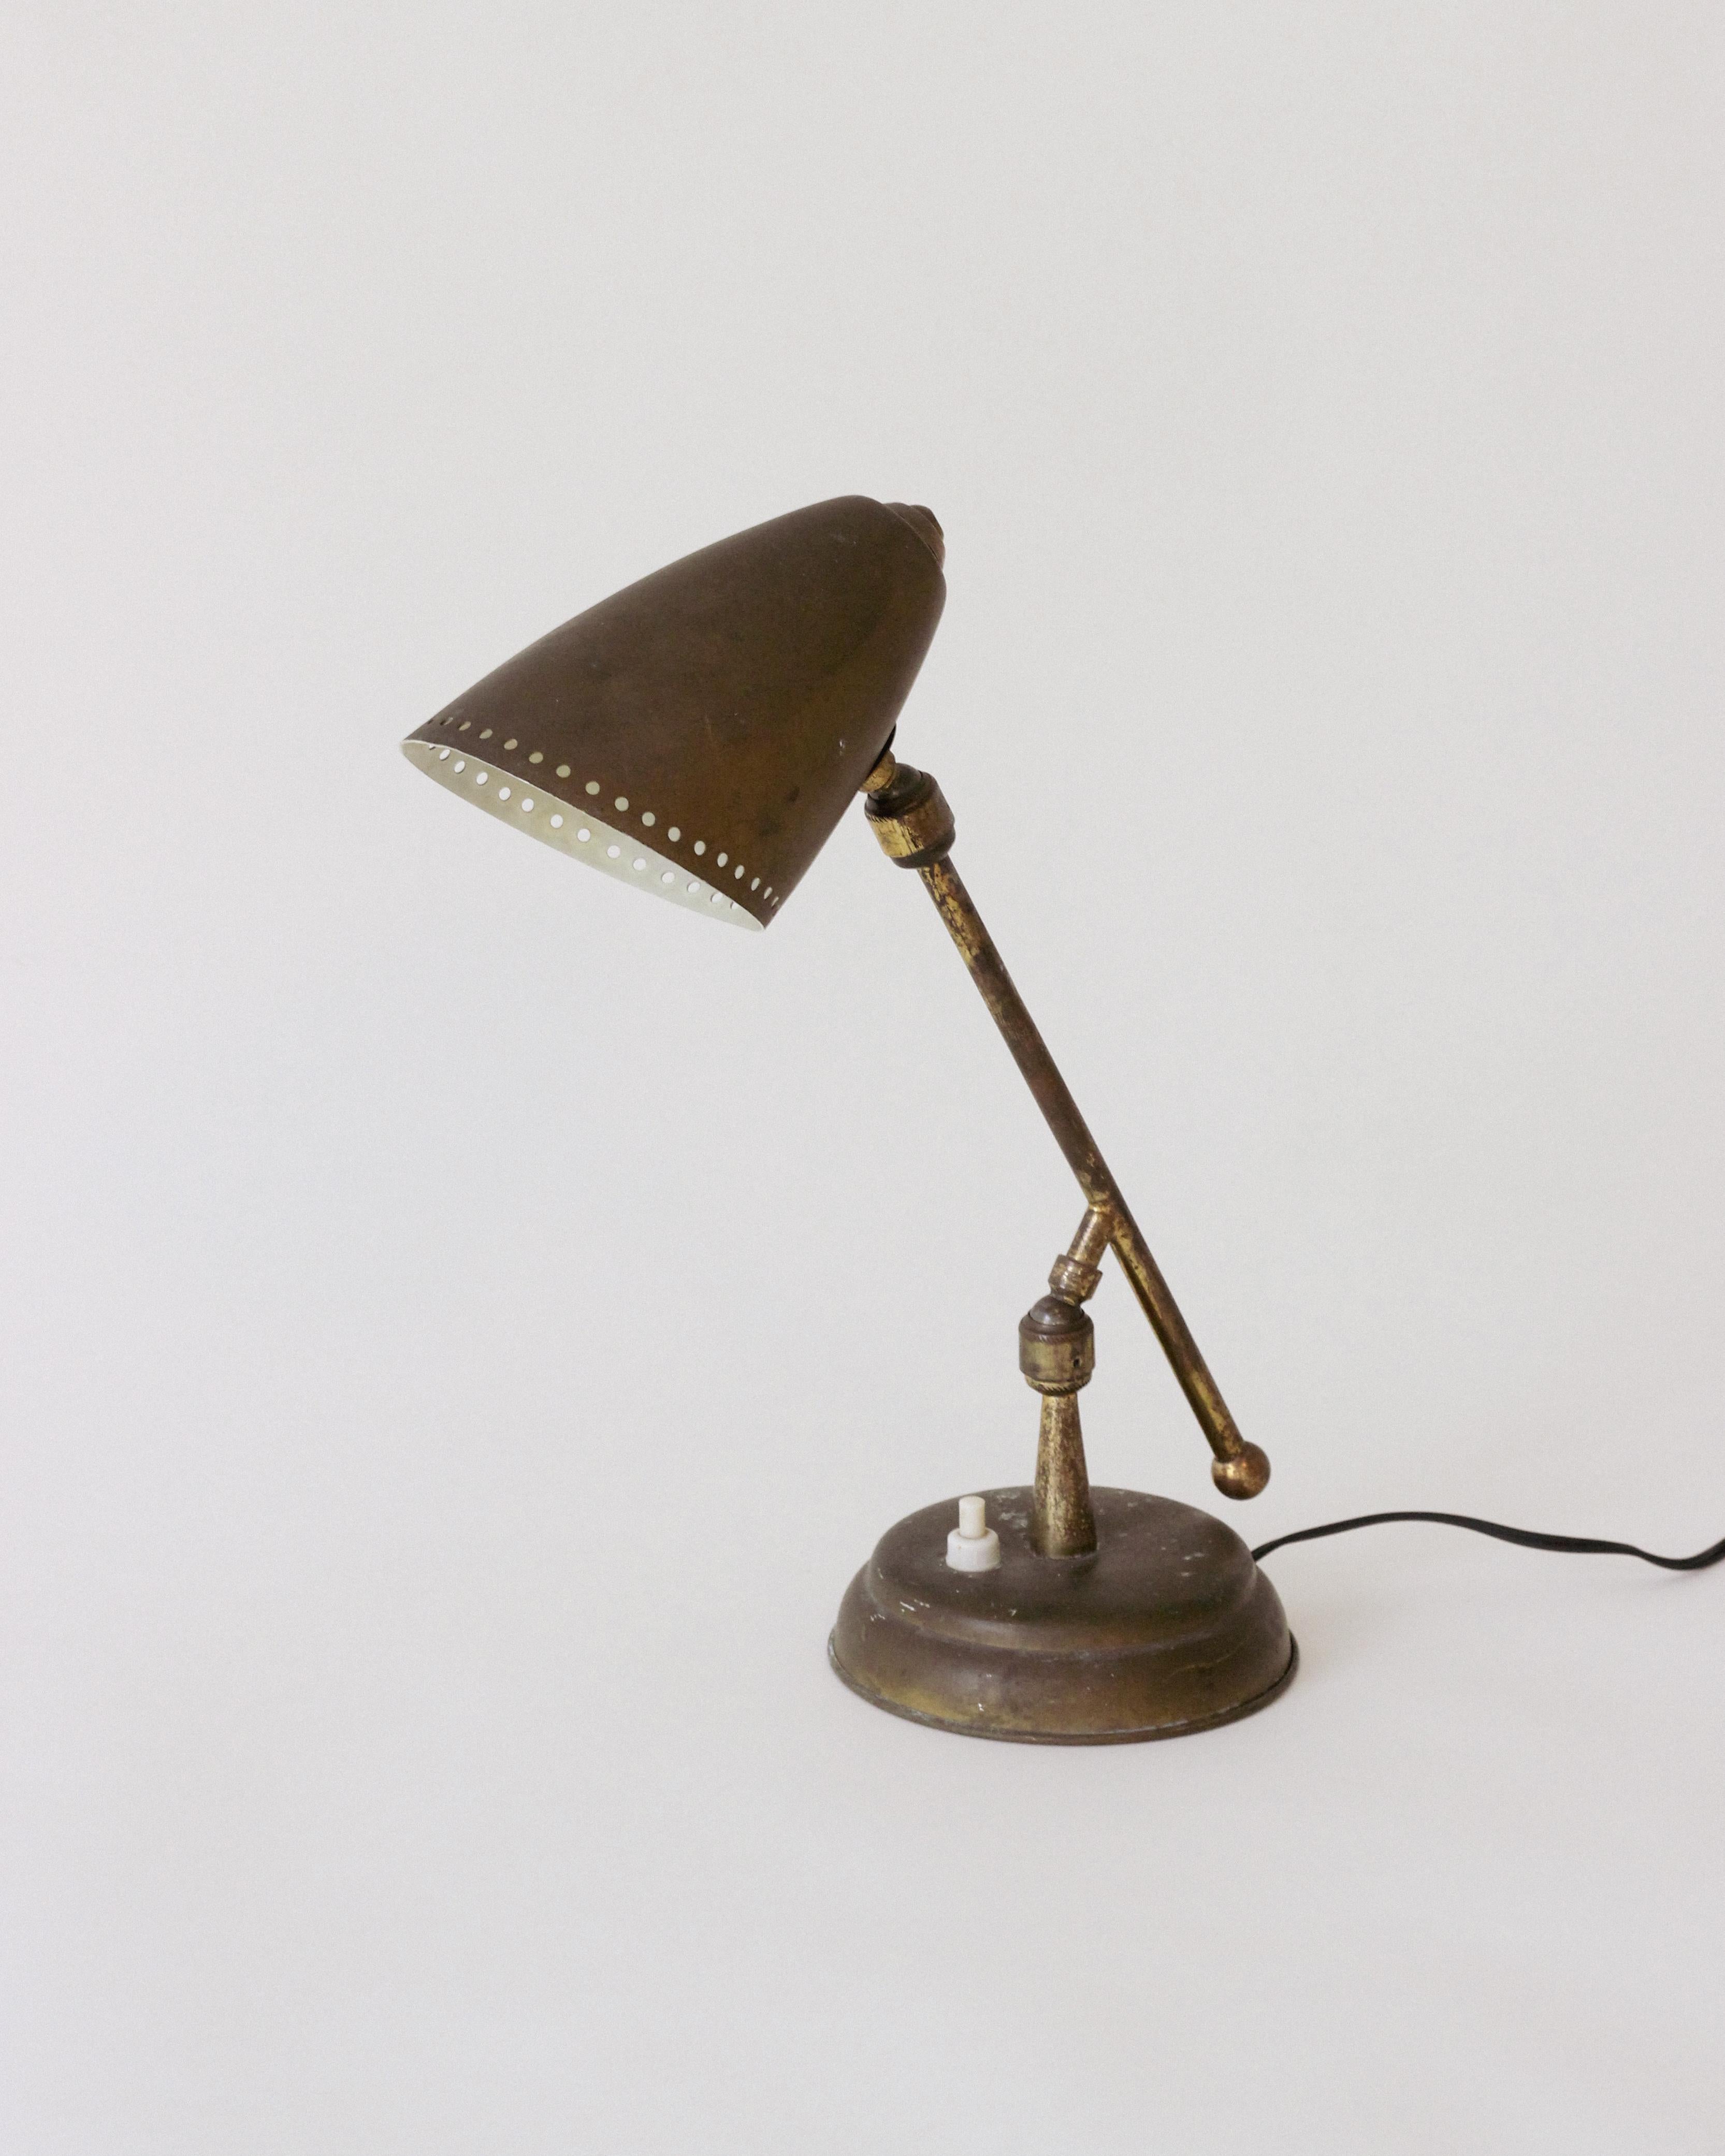 Vintage Italian Table Lamp Attributed to Stilnovo 

Circa 1948,  Made in Italy  

Gorgeous patina to brass in original condition. Re-wired with a black silk cord to US standards. 

Approx 11.5